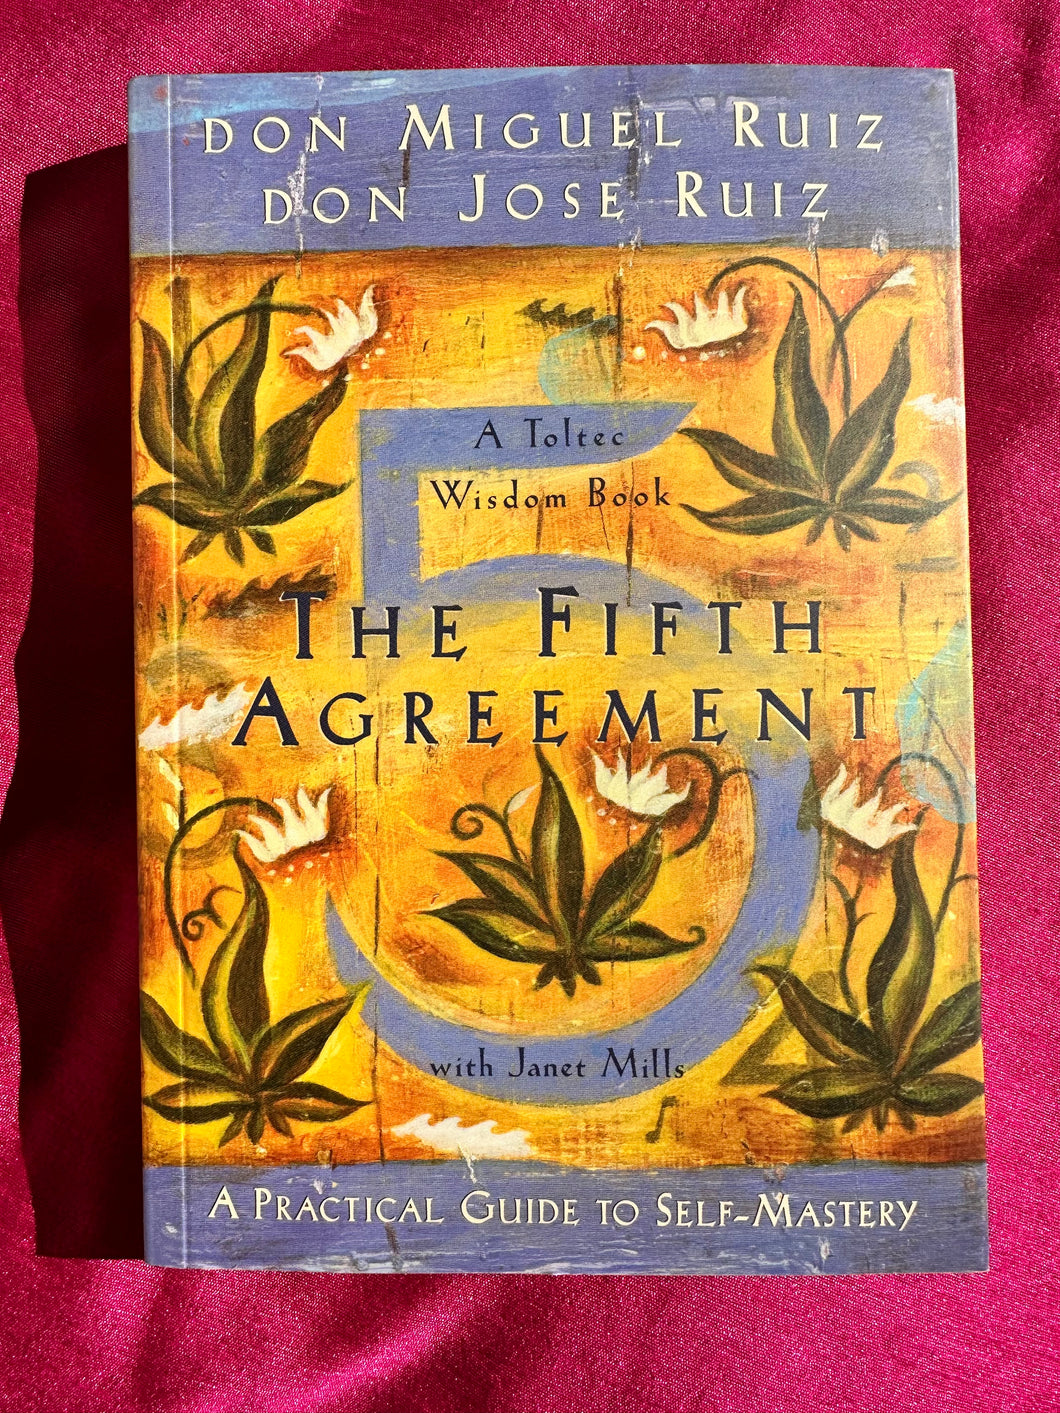 'The Fifth Agreement' by Don Miguel Ruiz